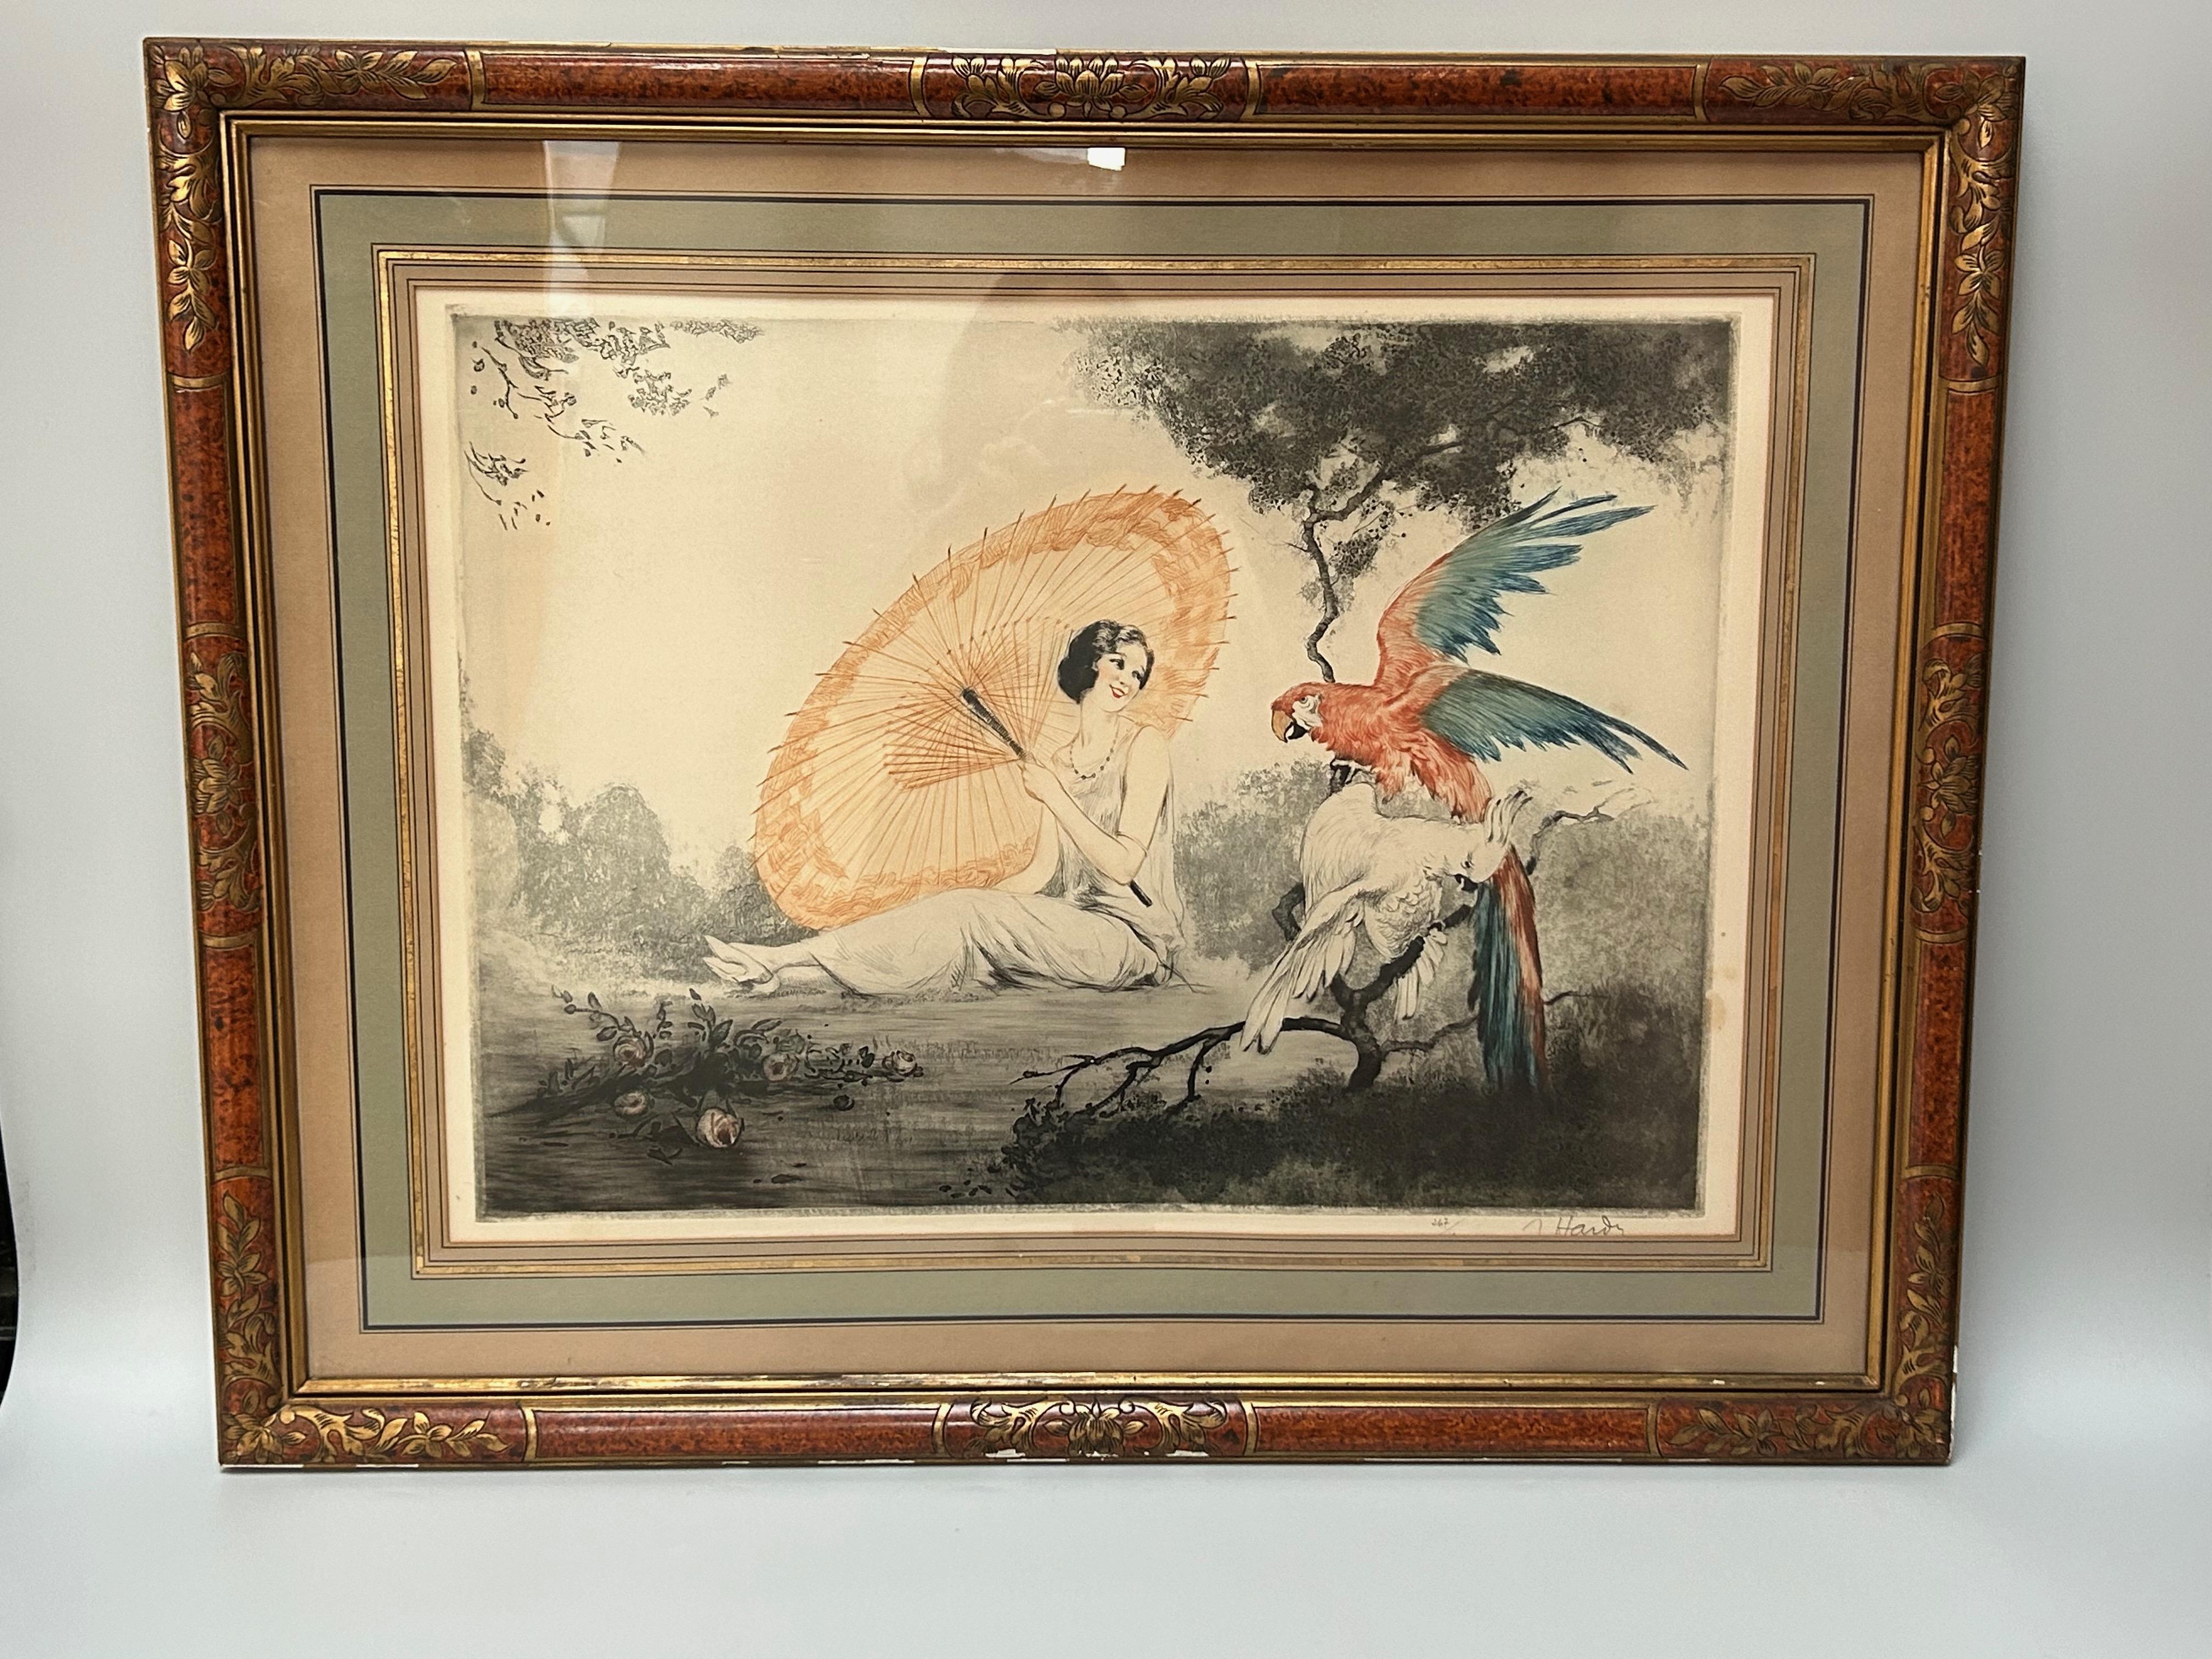 Art deco engraving circa 1925.
Elegant lady with parasol and macaws.
Signed Jean Hardy, French engraver, decorator and illustrator from the circle of the famous Art Deco artist, Louis Icart.
Numbered 267/350
Original frame with small chips and